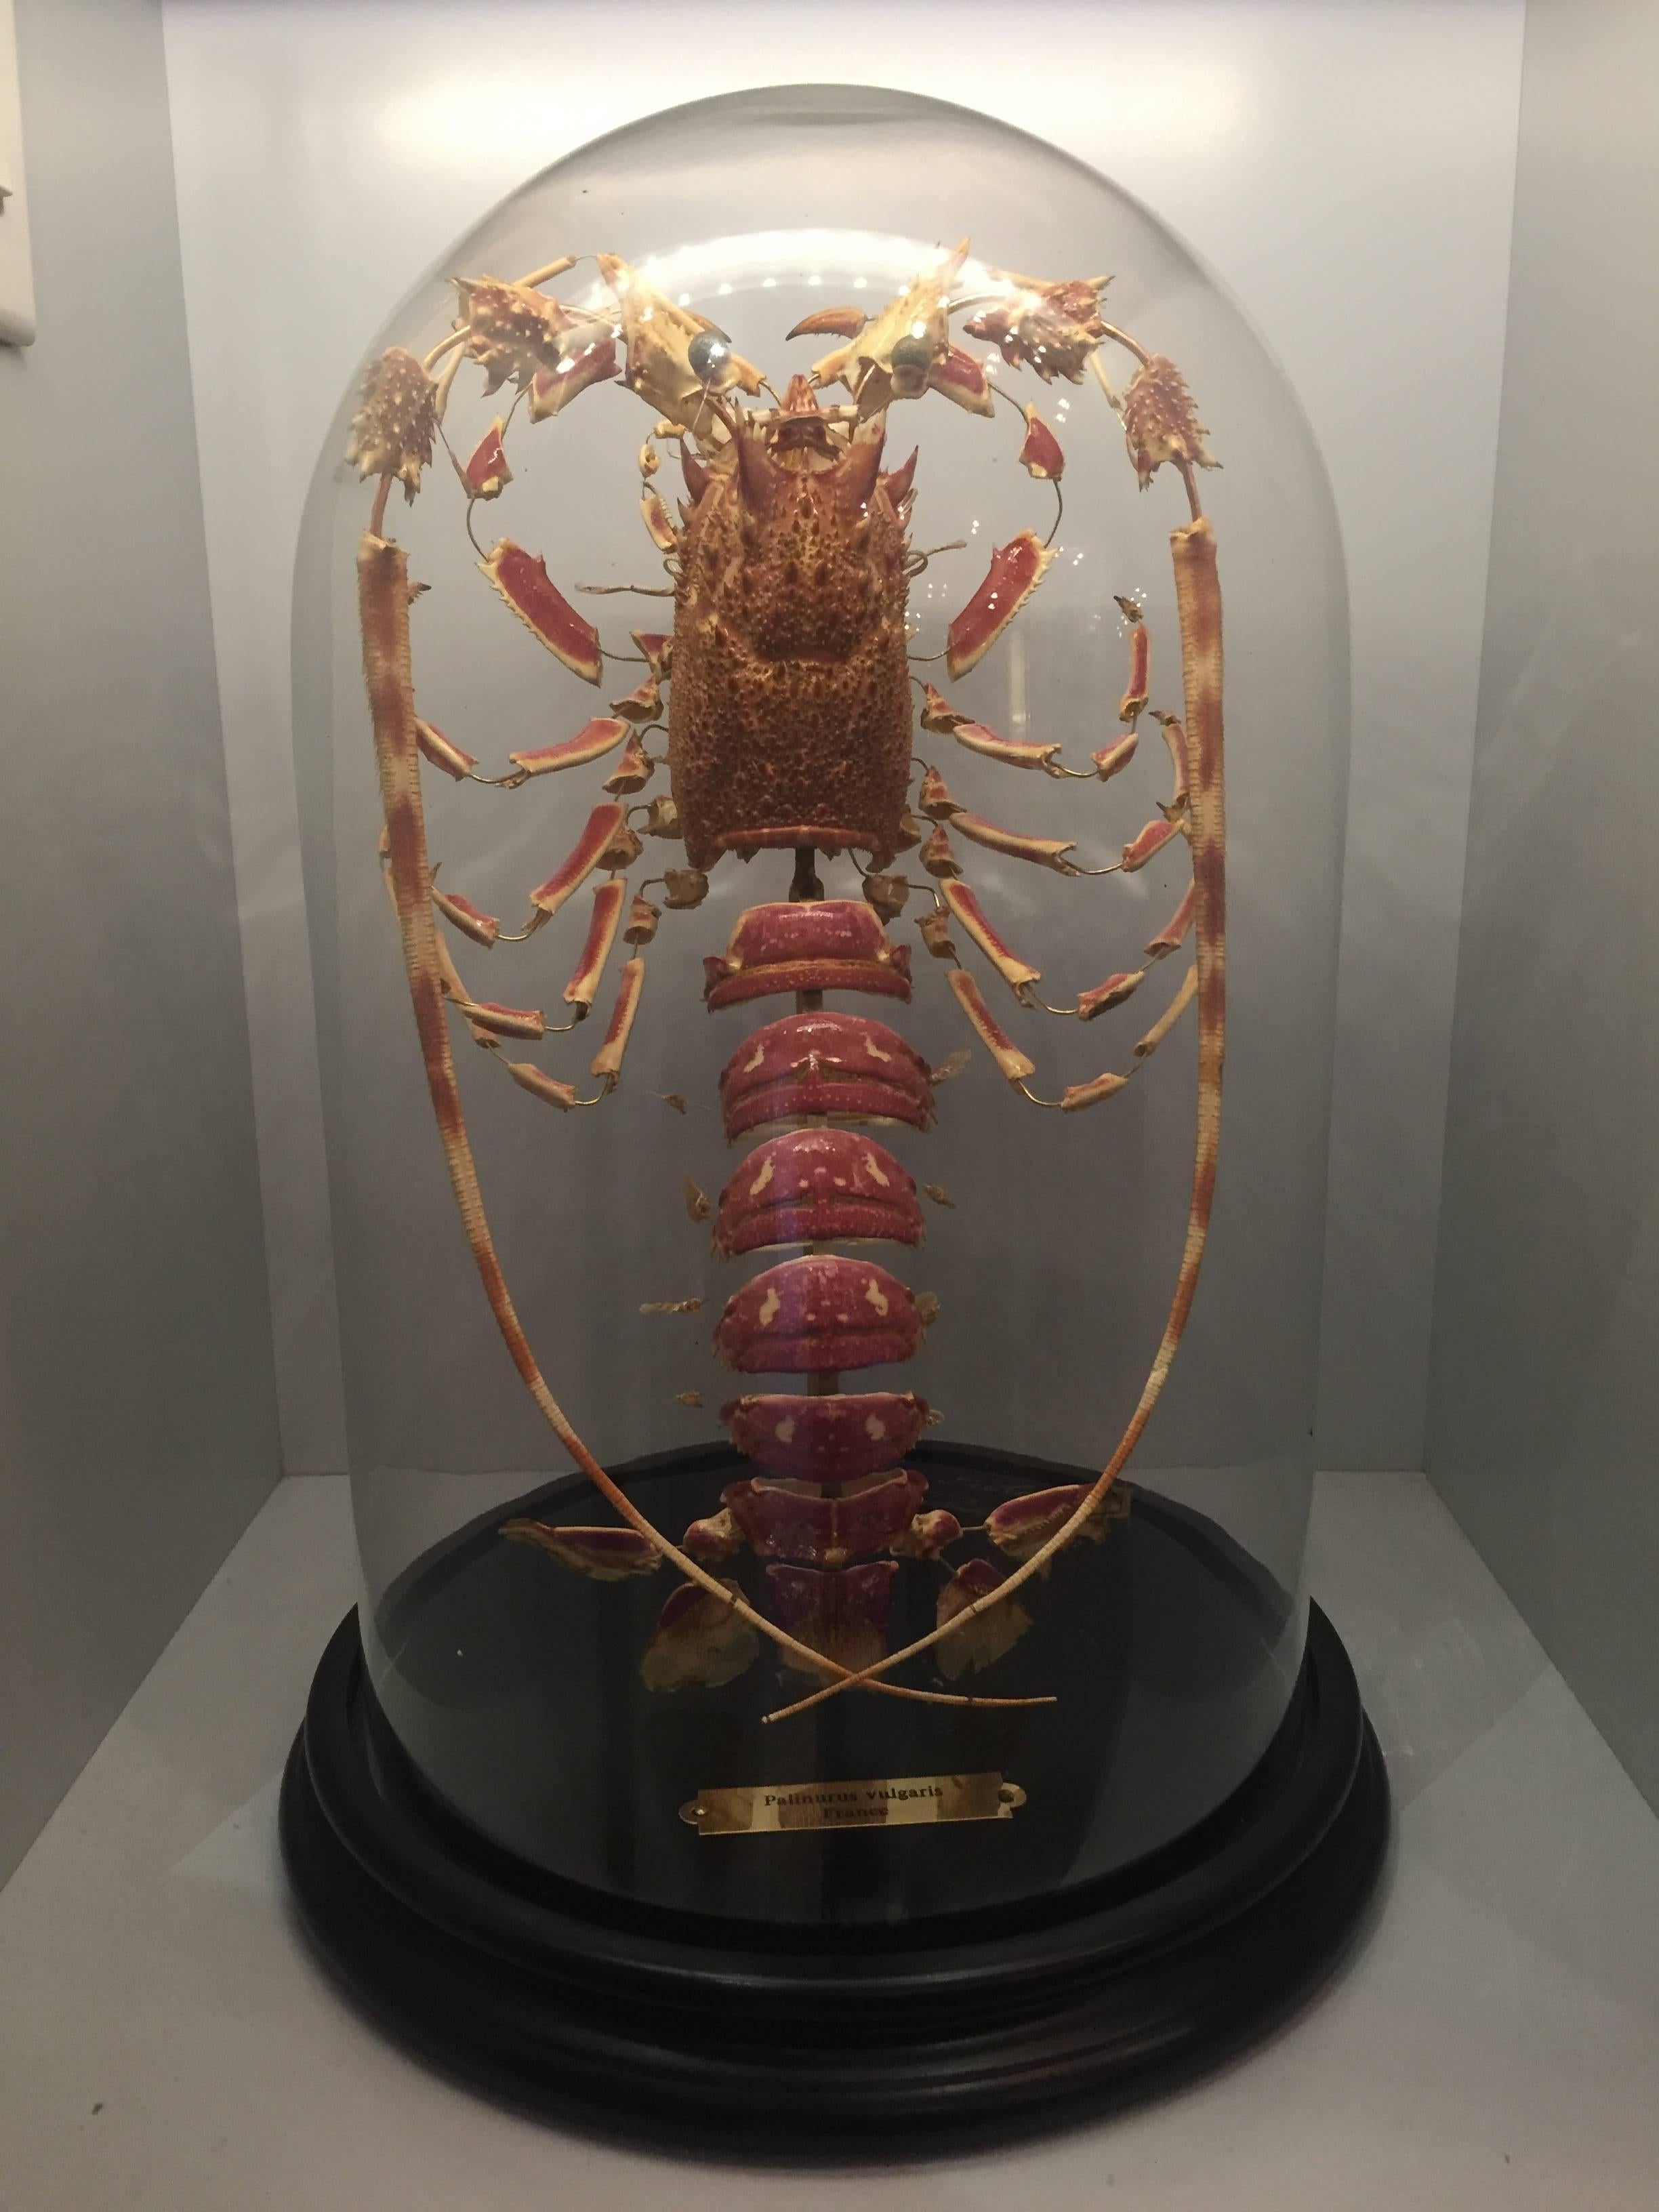 A deconstructed lobster (Palinurus vulgaris) mounted on a black painted wood base with a glass dome, made in France .

The technique was invented by Dr Claude Beauchene in France in the 19th century and involves the meticulous taking apart of all